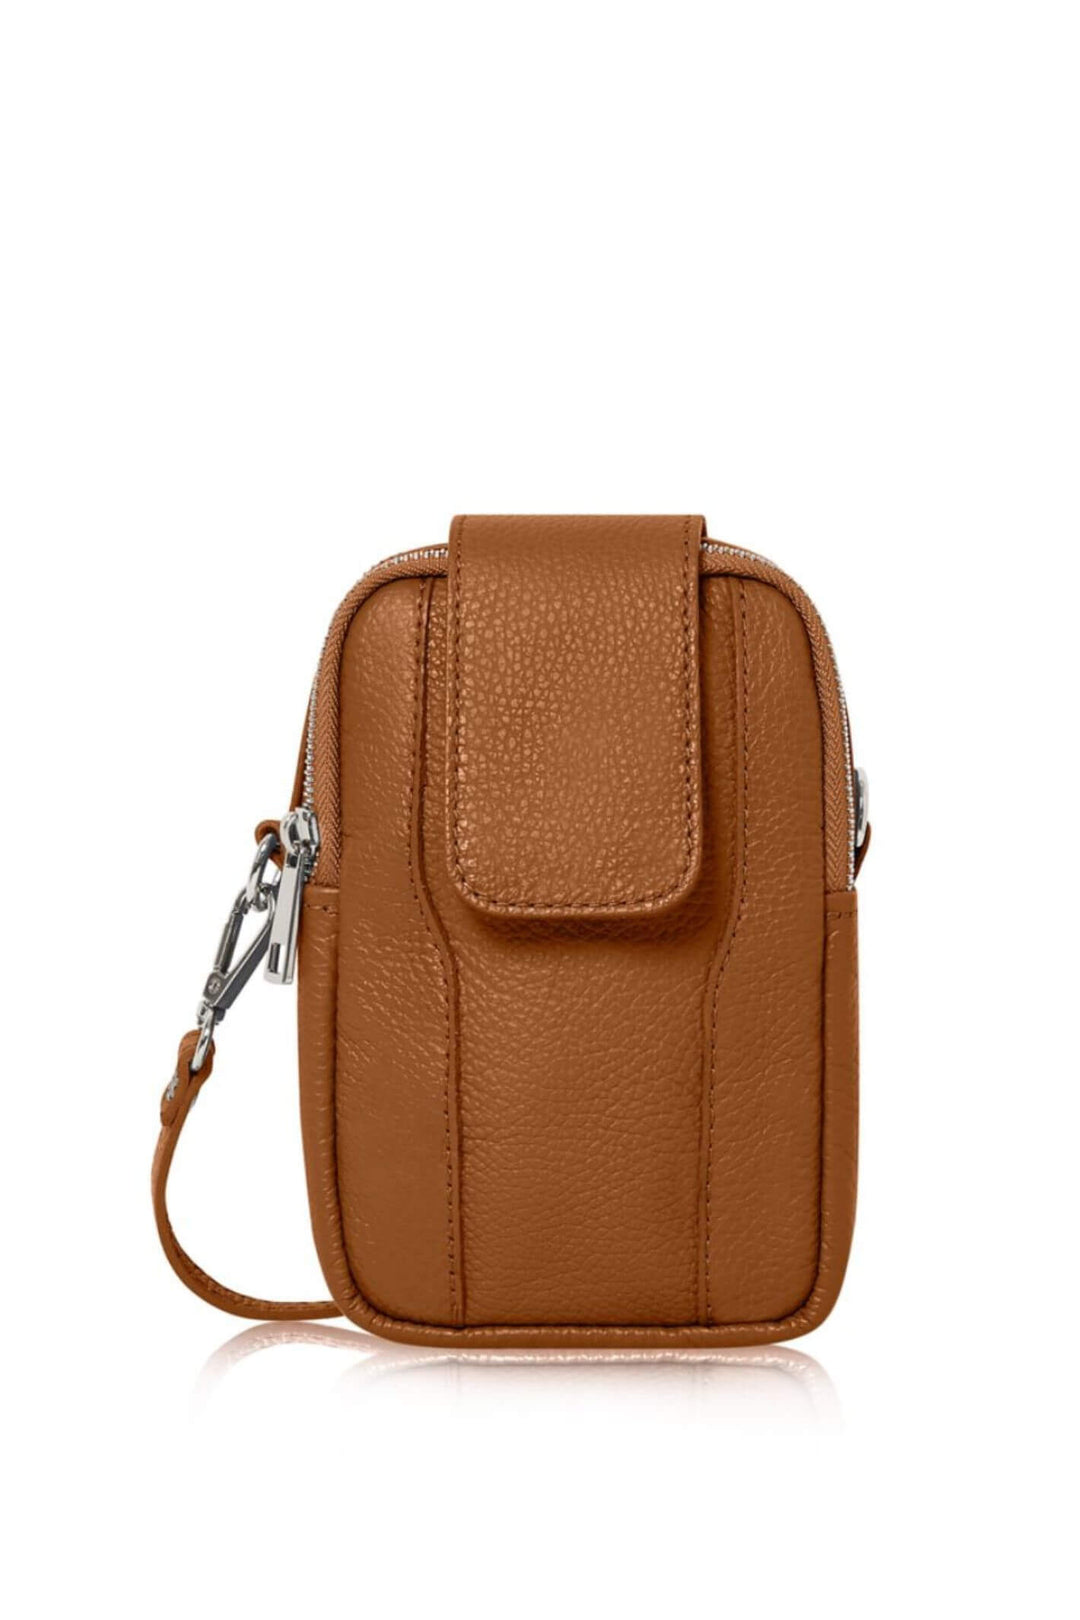 Tan Leather Twin Compartment Cross Body Phone Bag